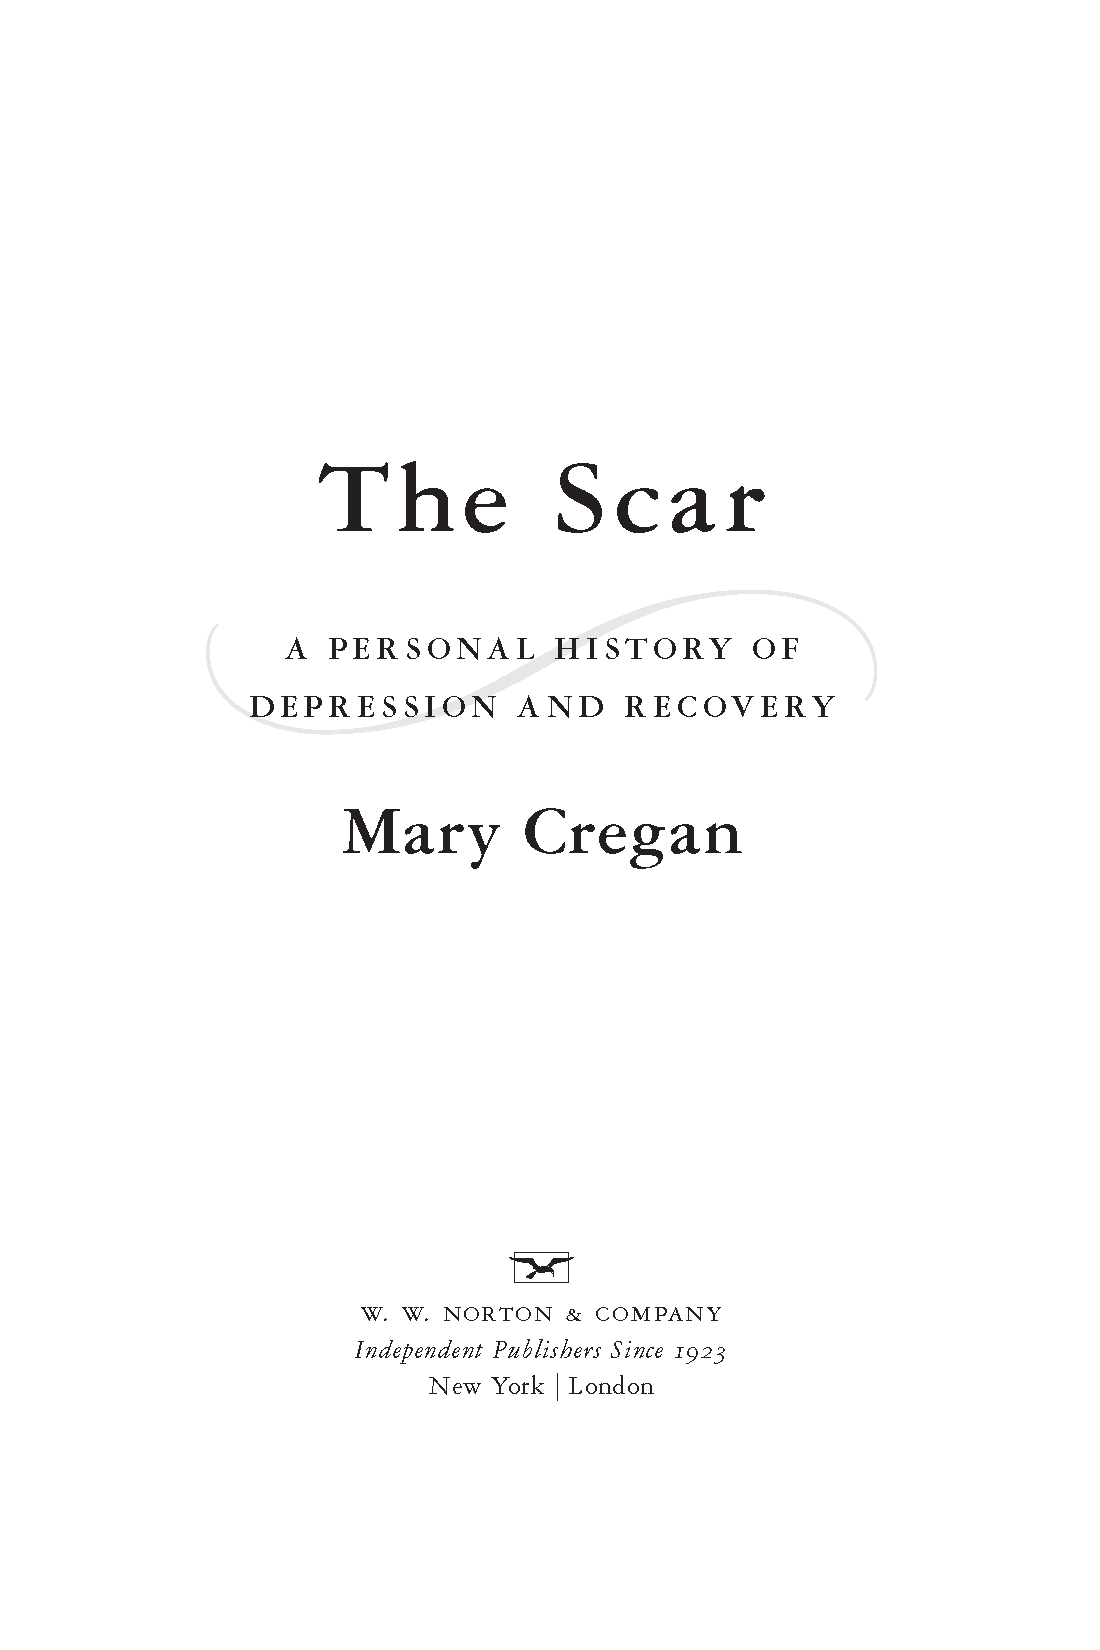 Beautifully designed book cover for The Scar by Mary Cregan